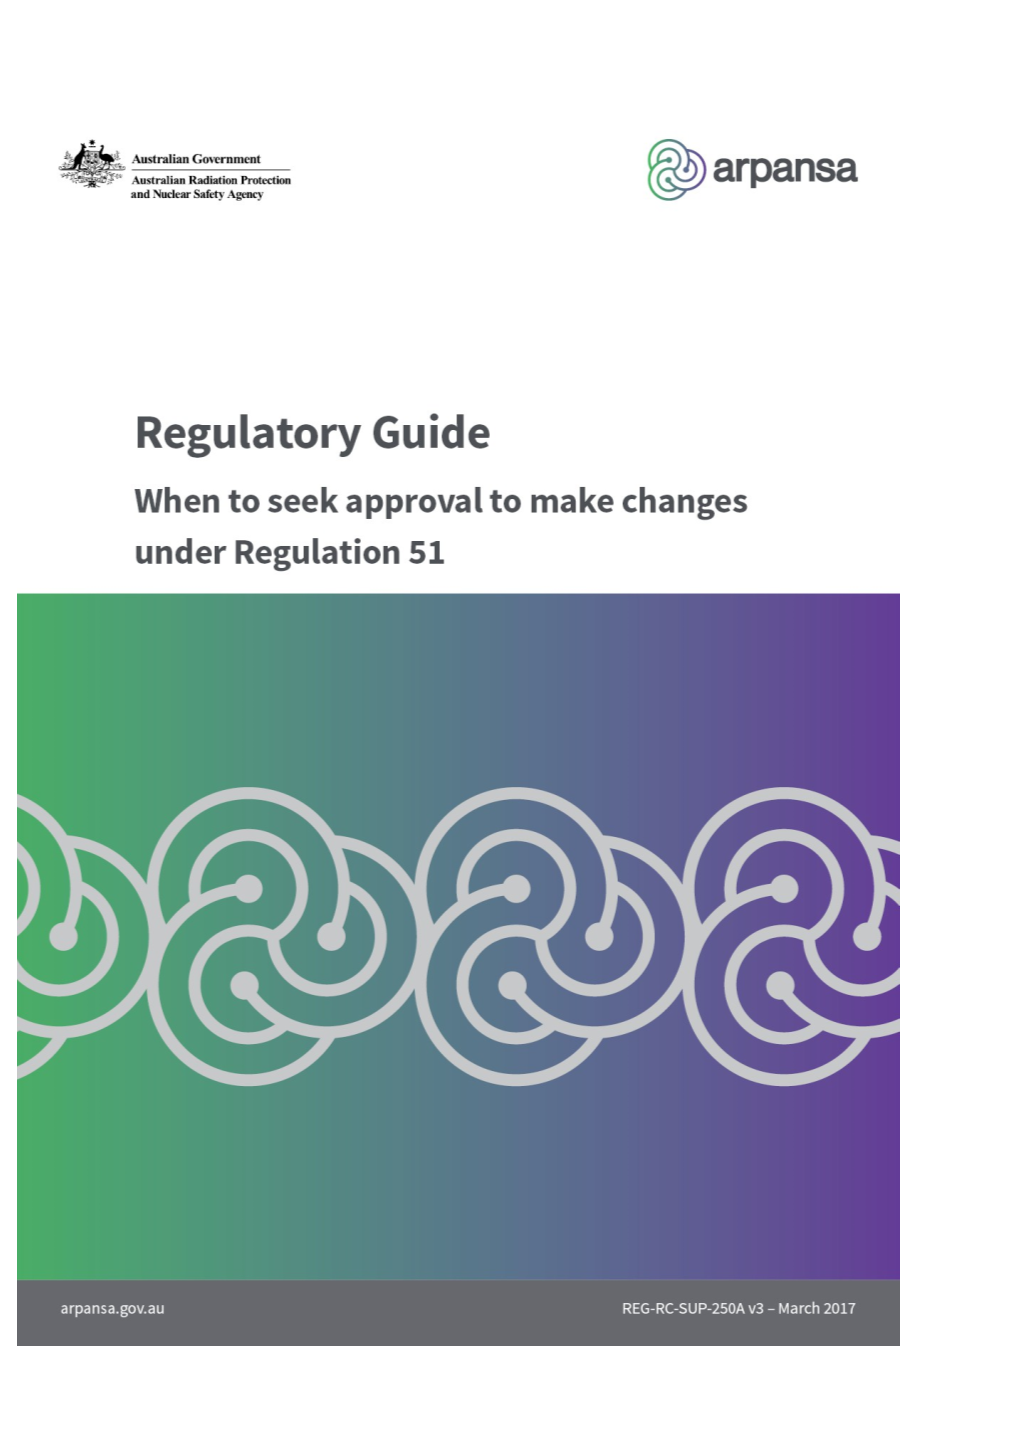 When to Seek Approval to Make Changes Under Regulation 51